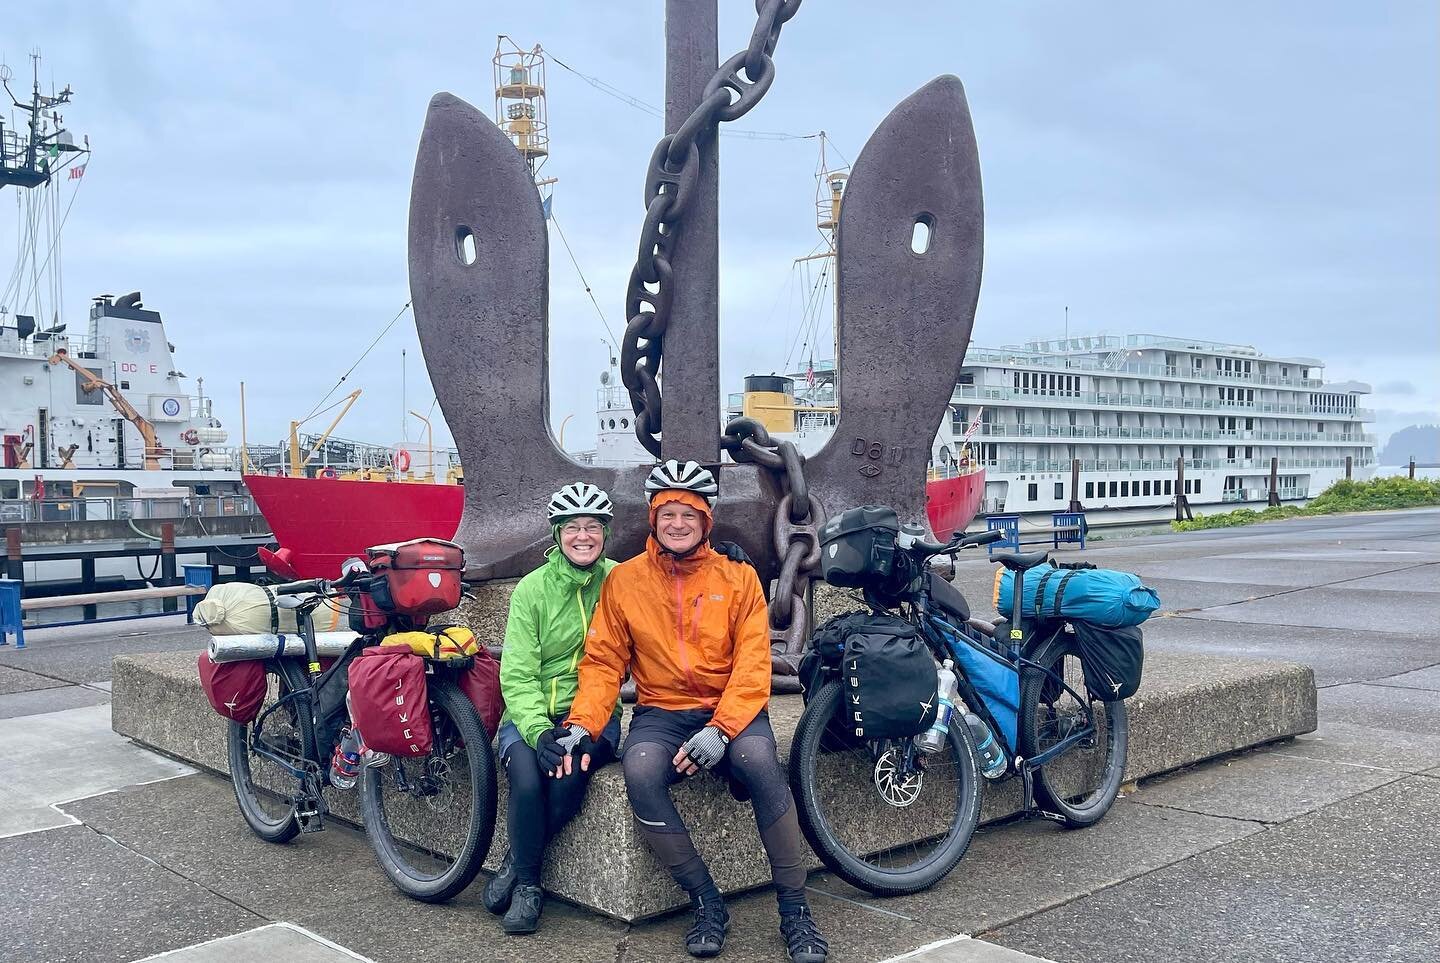 In Oregon we revisited Astoria at the mouth of the Columbia River and the town of Seaside.  We visited both towns when we crossed America on the TransAmerica Bike Route in 2018.  We saw some wonderful coastline and had some interesting wildlife sight